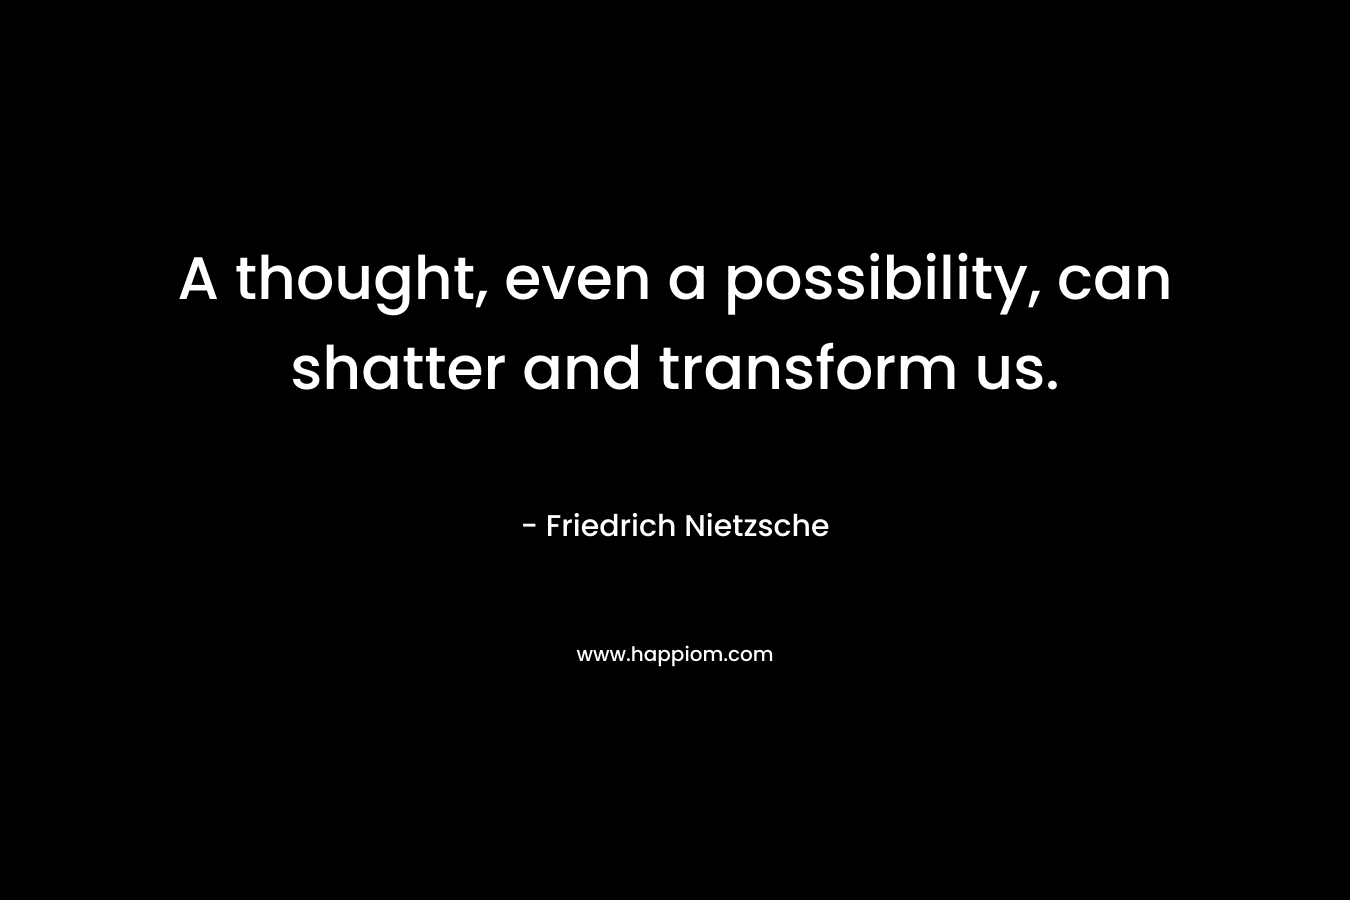 A thought, even a possibility, can shatter and transform us.